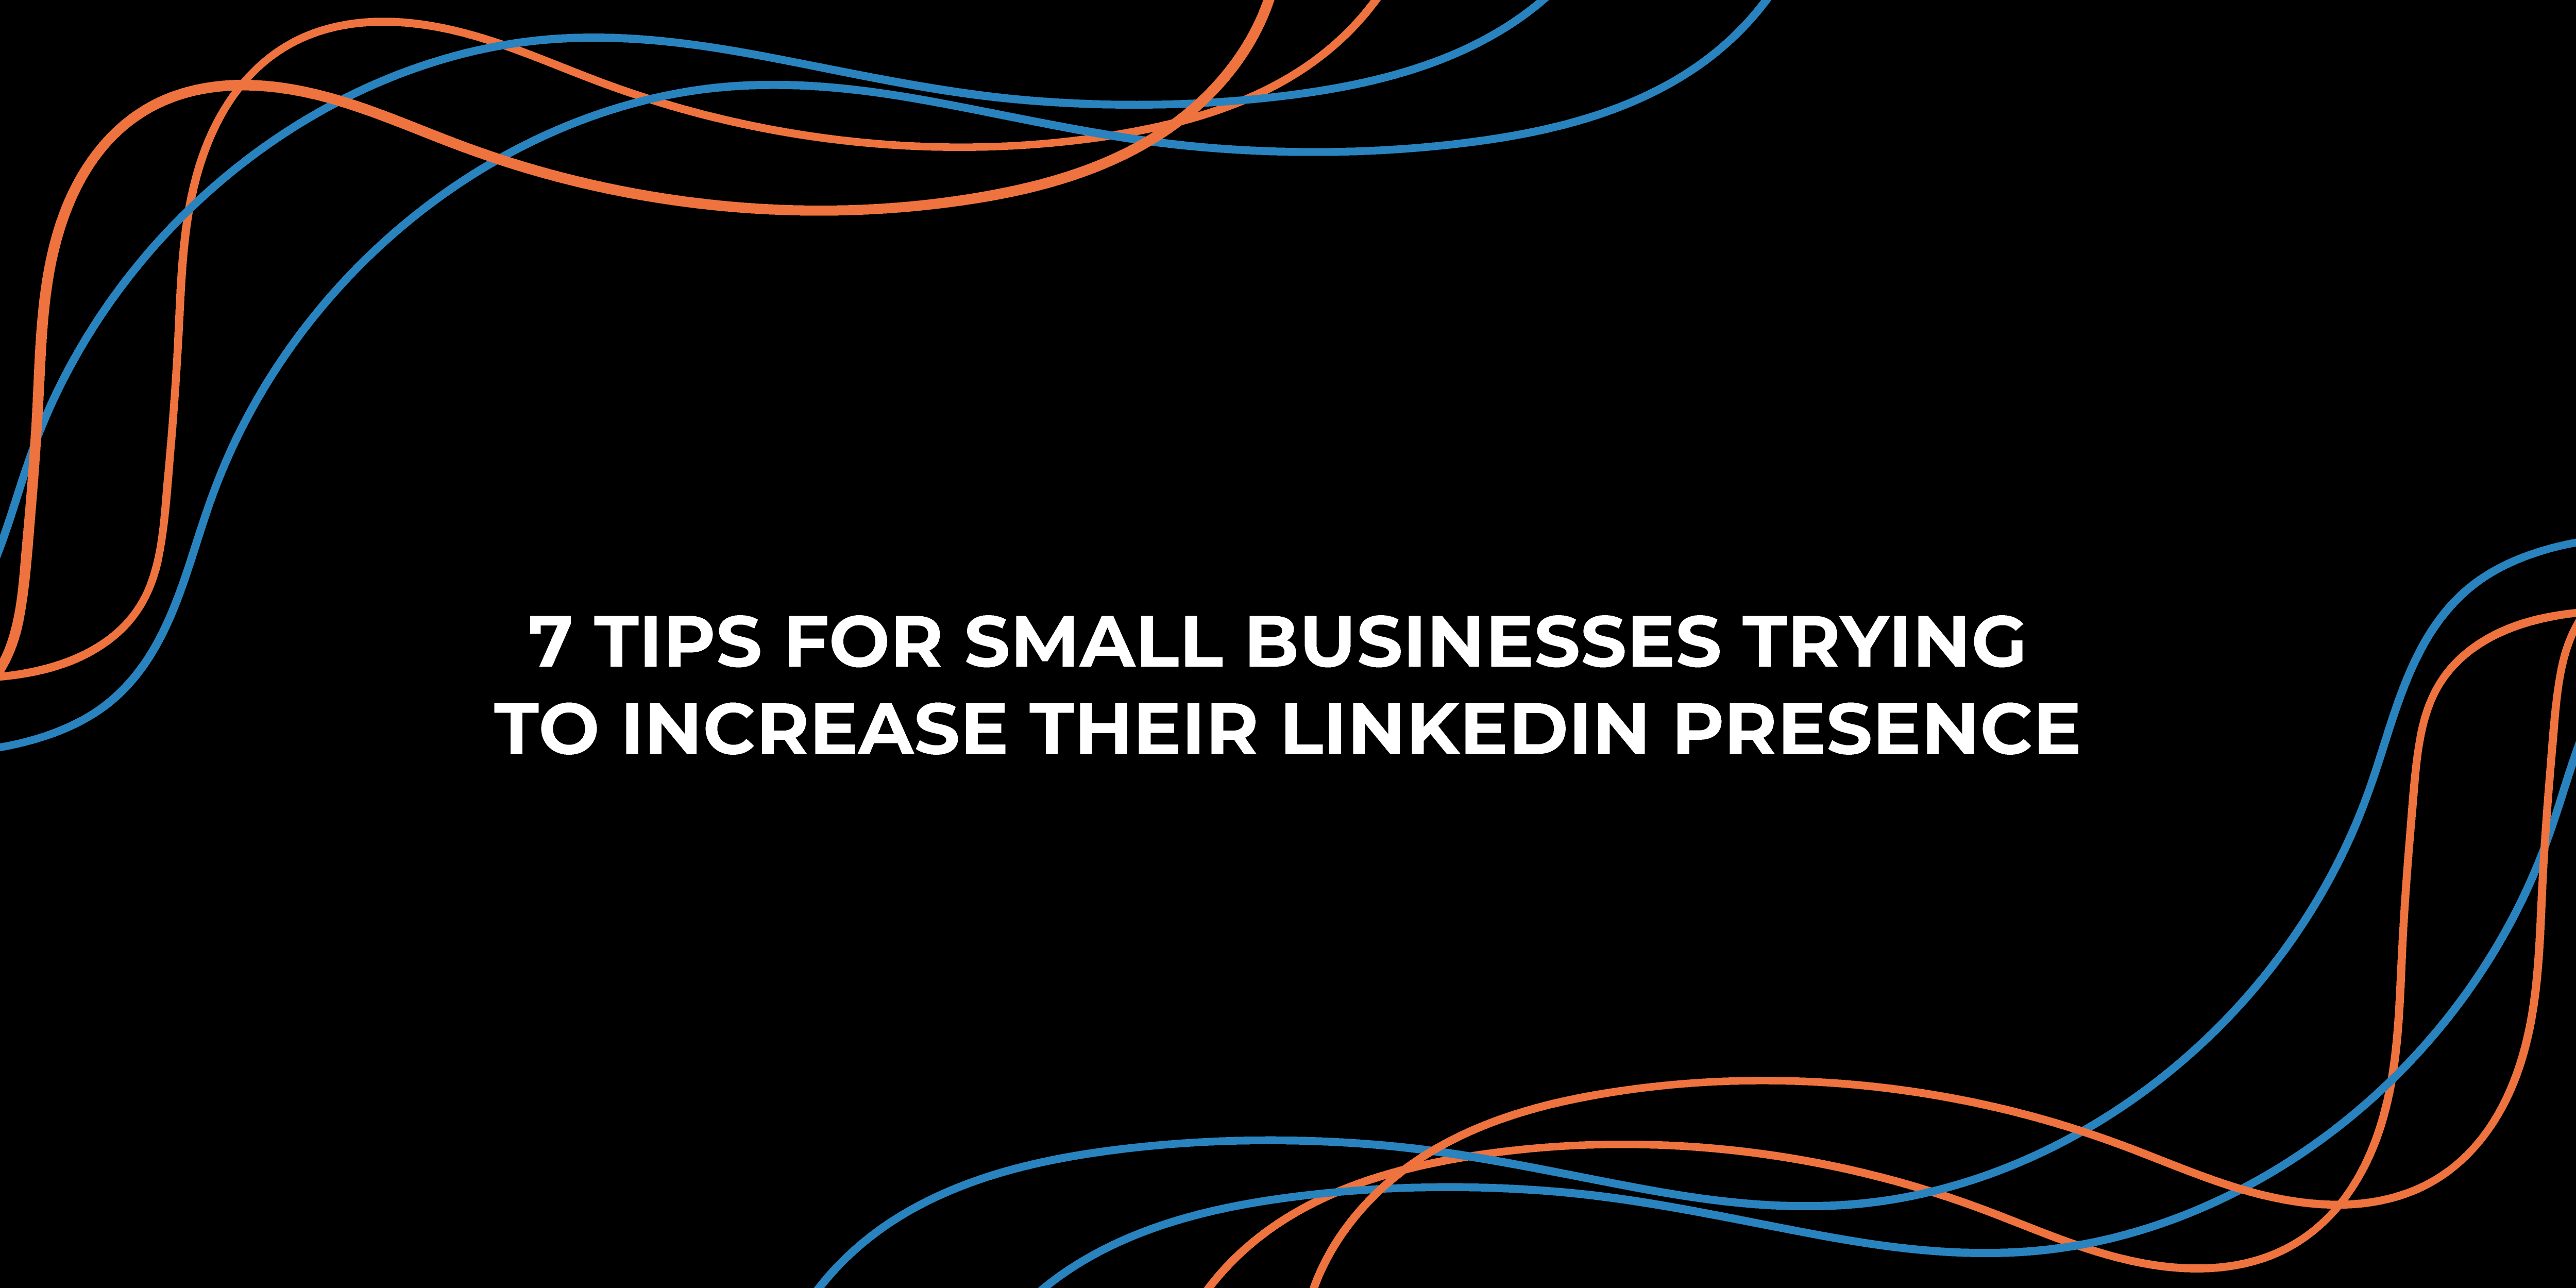 7 tips for small businesses trying to increase their LinkedIn presence